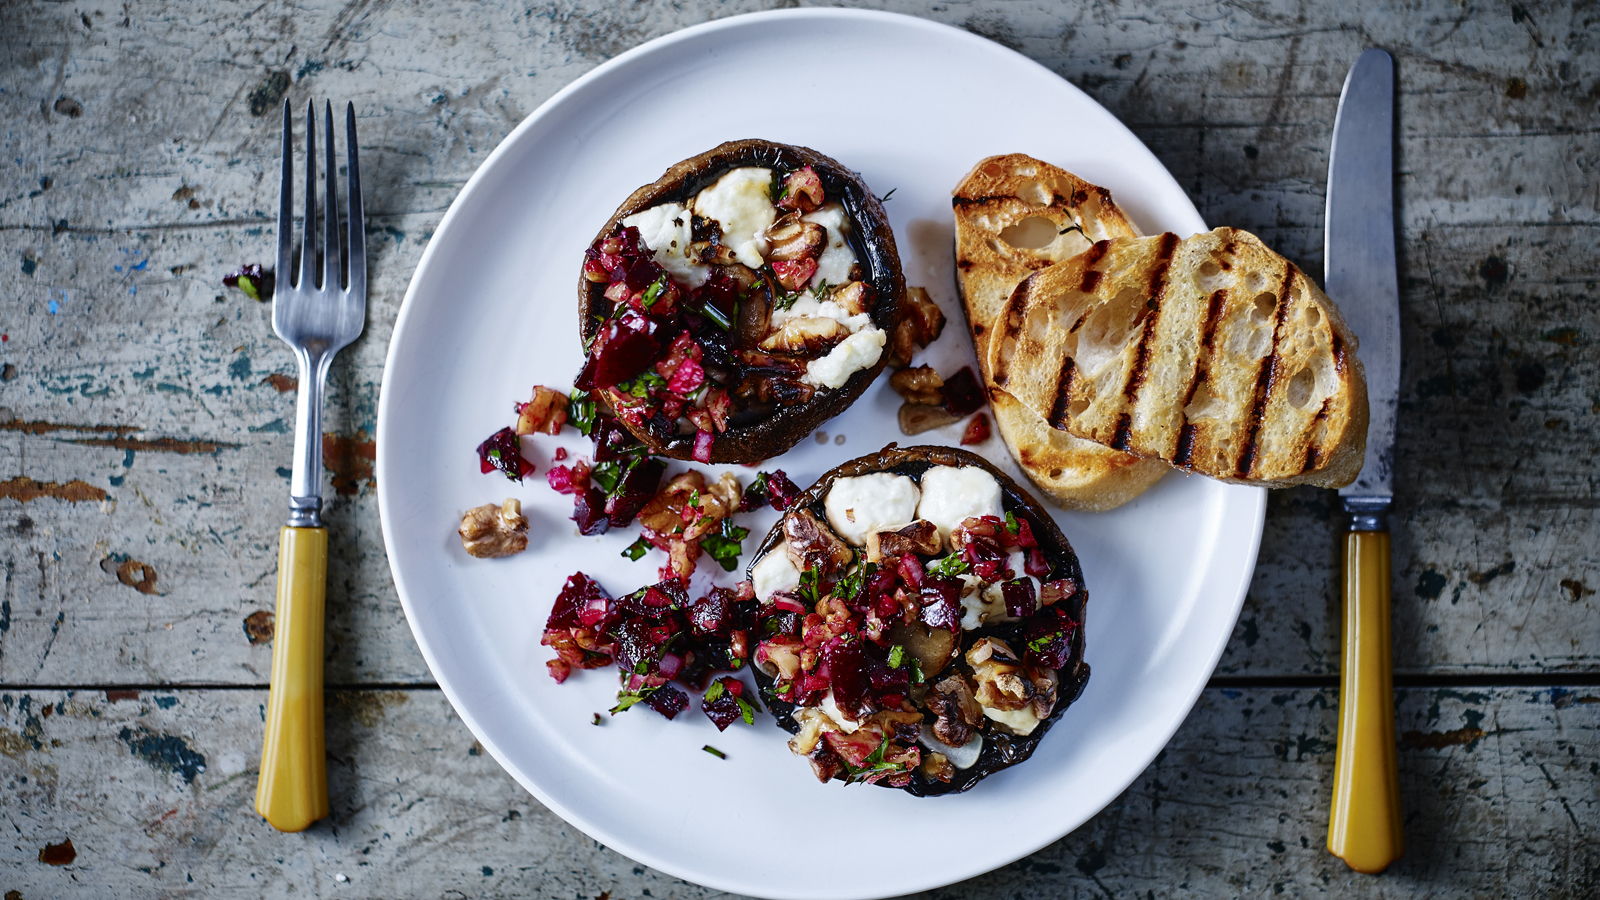 Grilled mushrooms with goats' cheese and beetroot and walnut salsa recipe